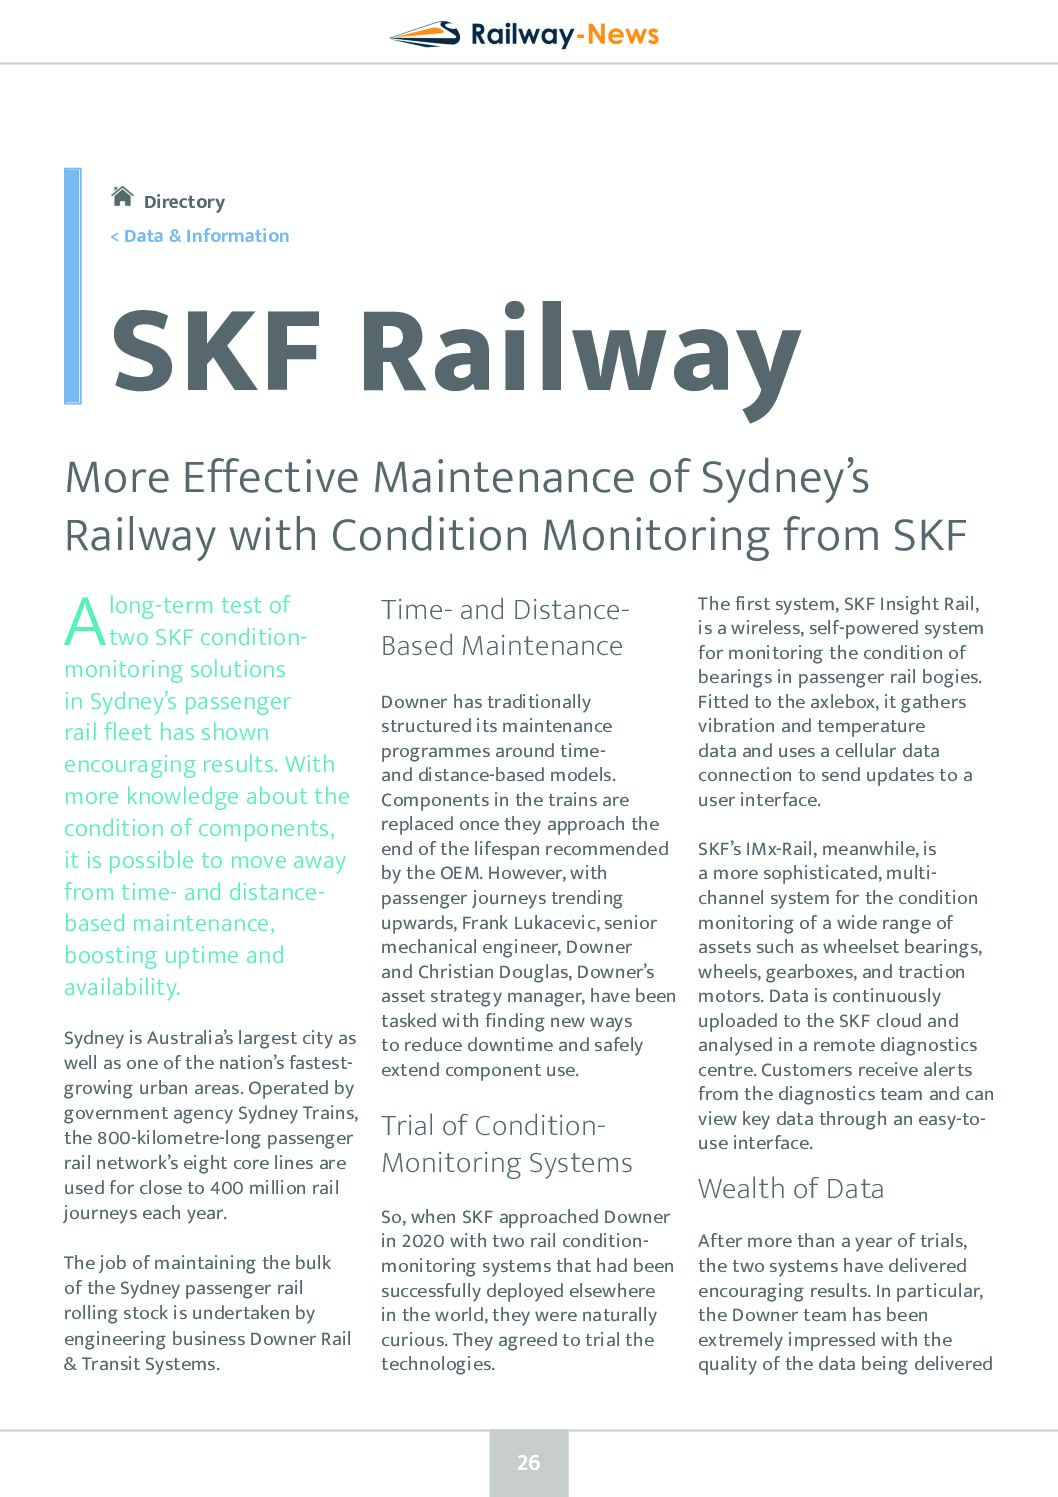 More Effective Maintenance of Sydney’s Railway with SKF Condition Monitoring